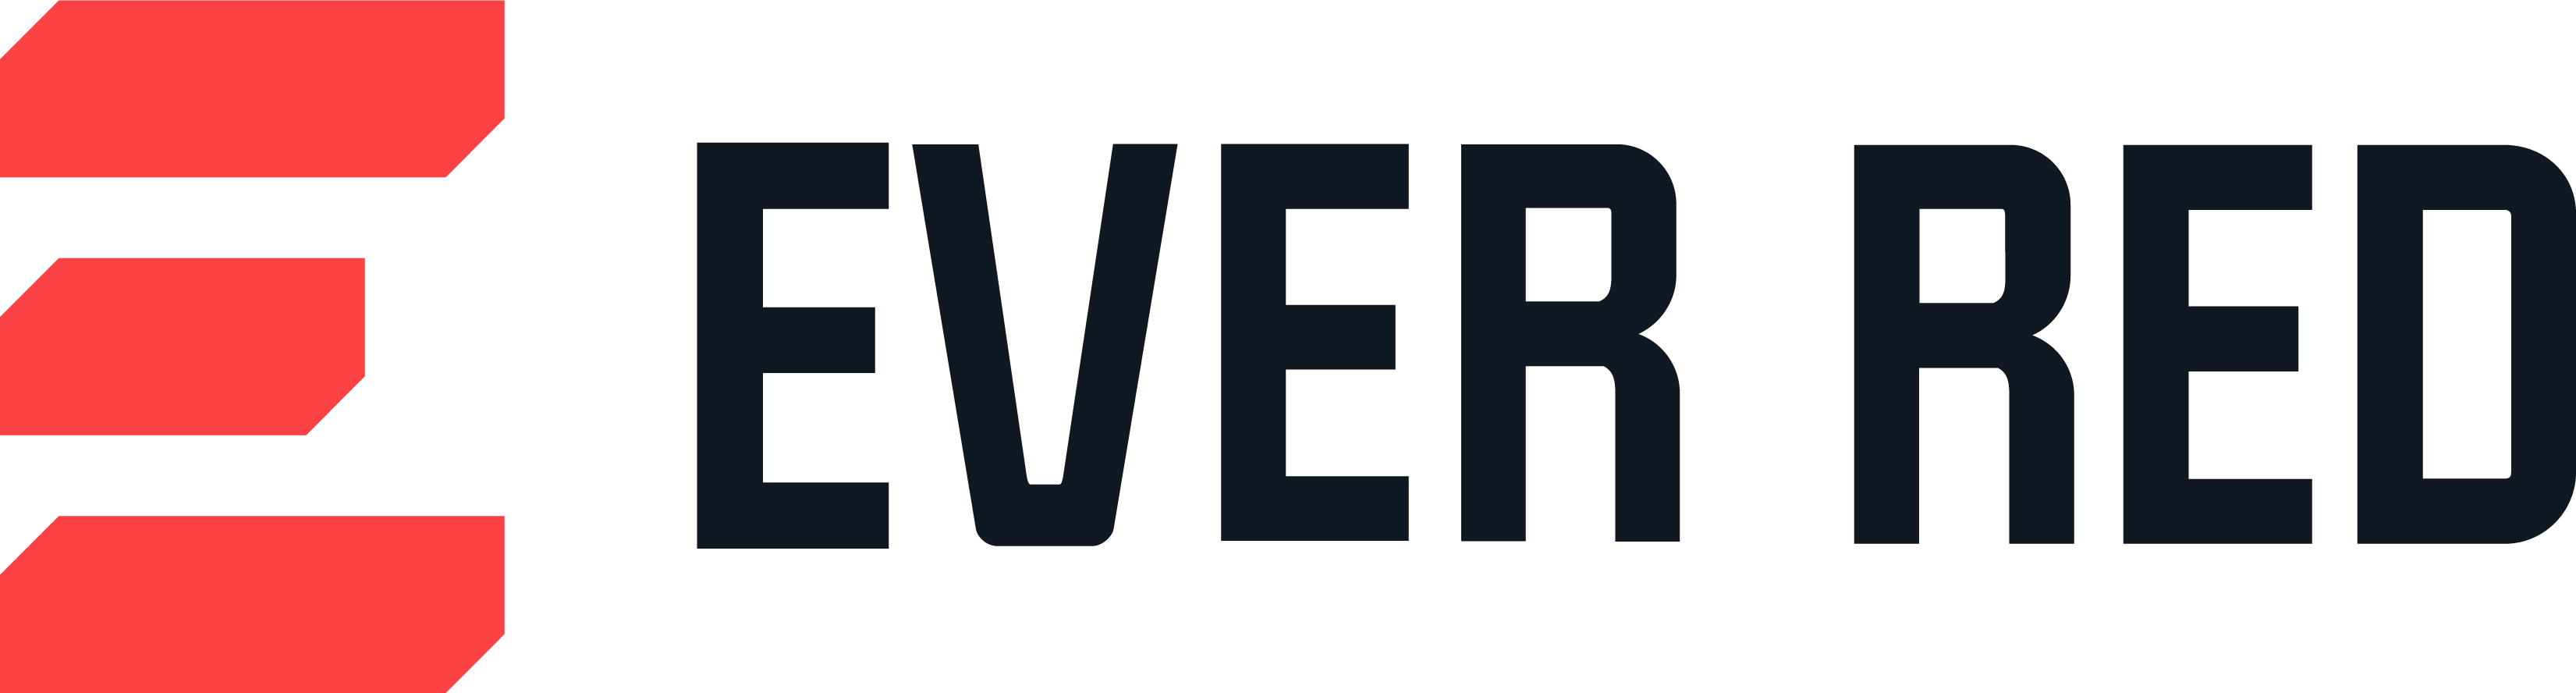 ever-red-logo-full-colour-rgb.png